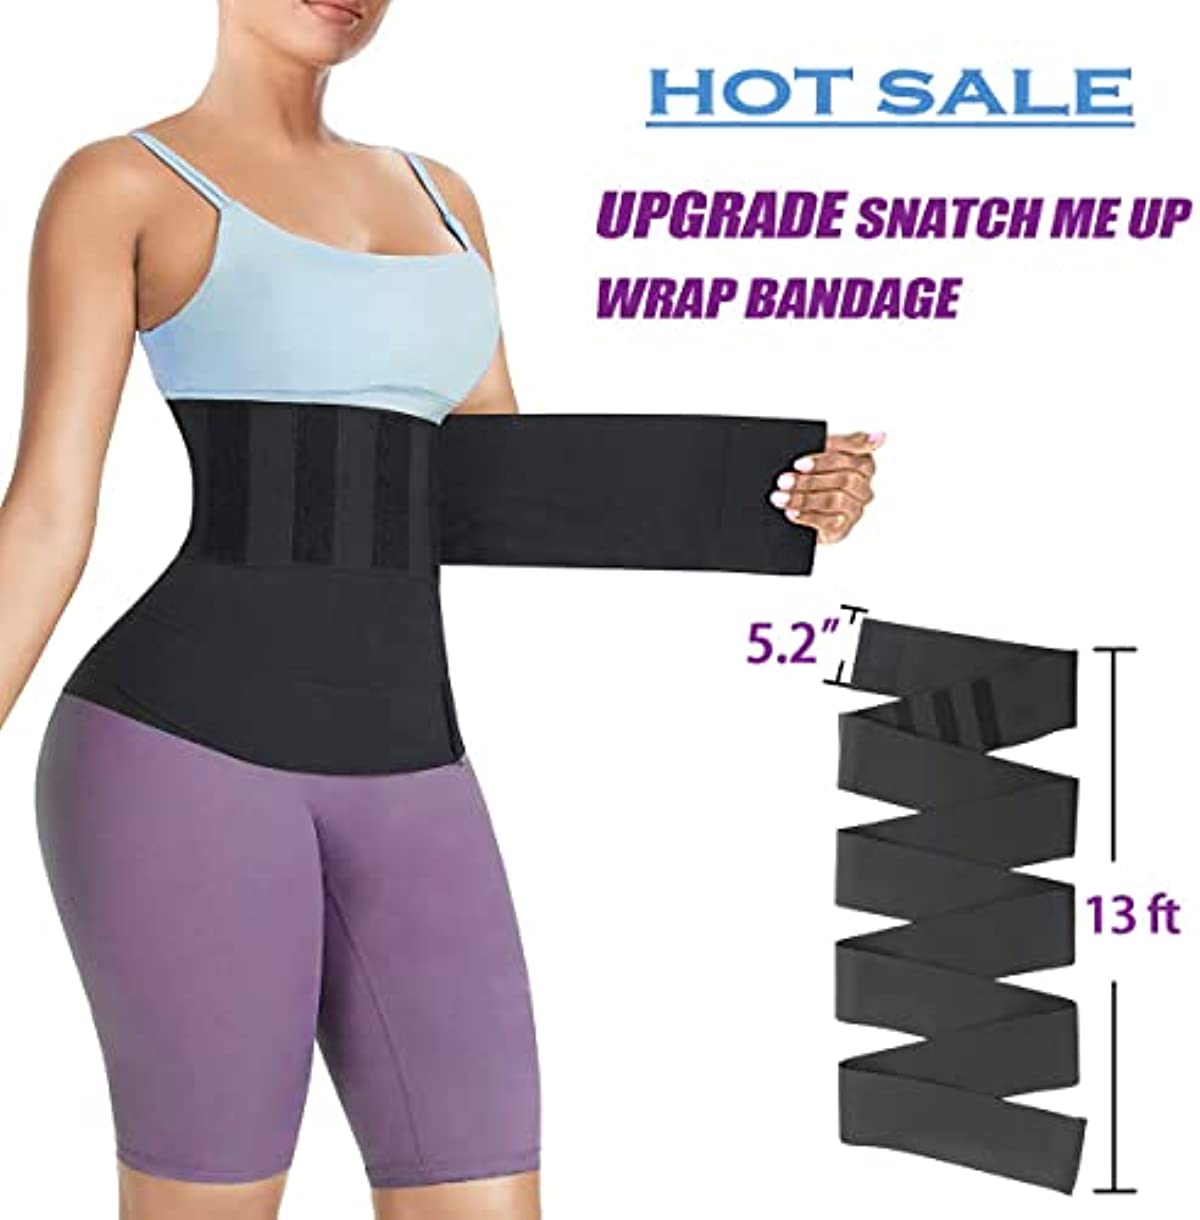 Wrap Waist Trainer for Women Waist Wraps for Stomach Snatch Me Up Bandage Tummy Wrap Plus Size Trimmer Belt Sweat Body Belly